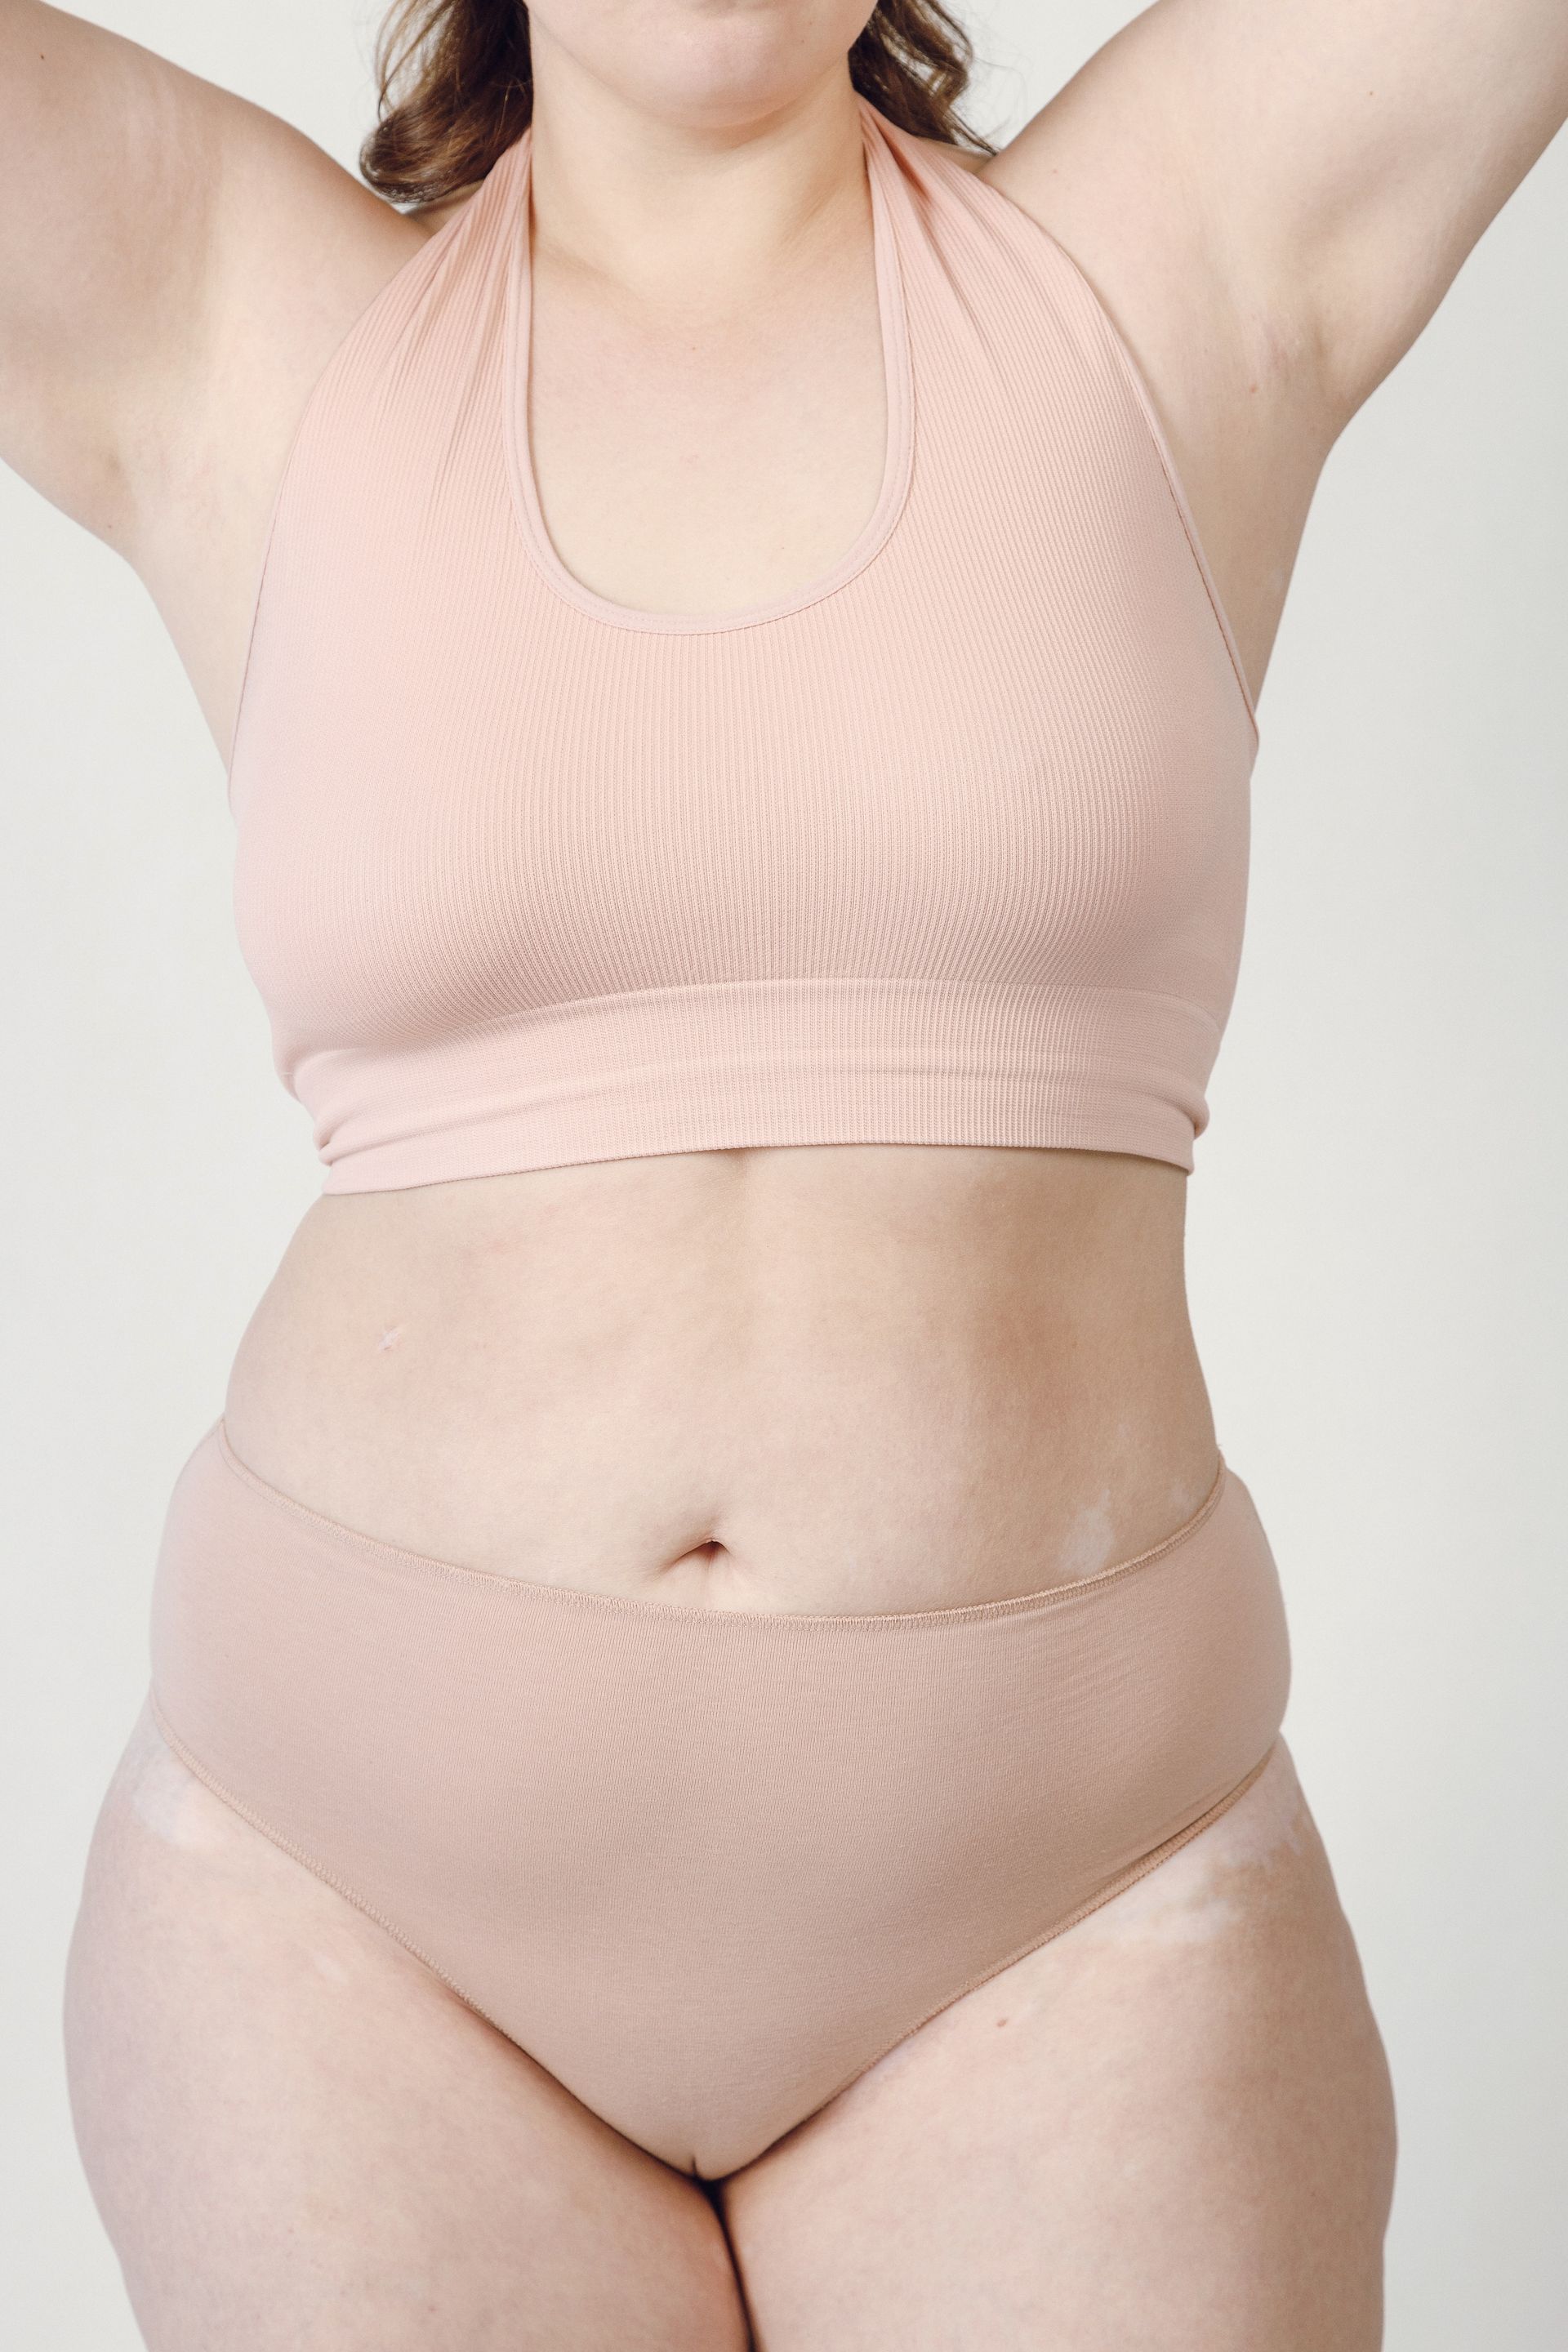 a woman is wearing a pink bra and panties .